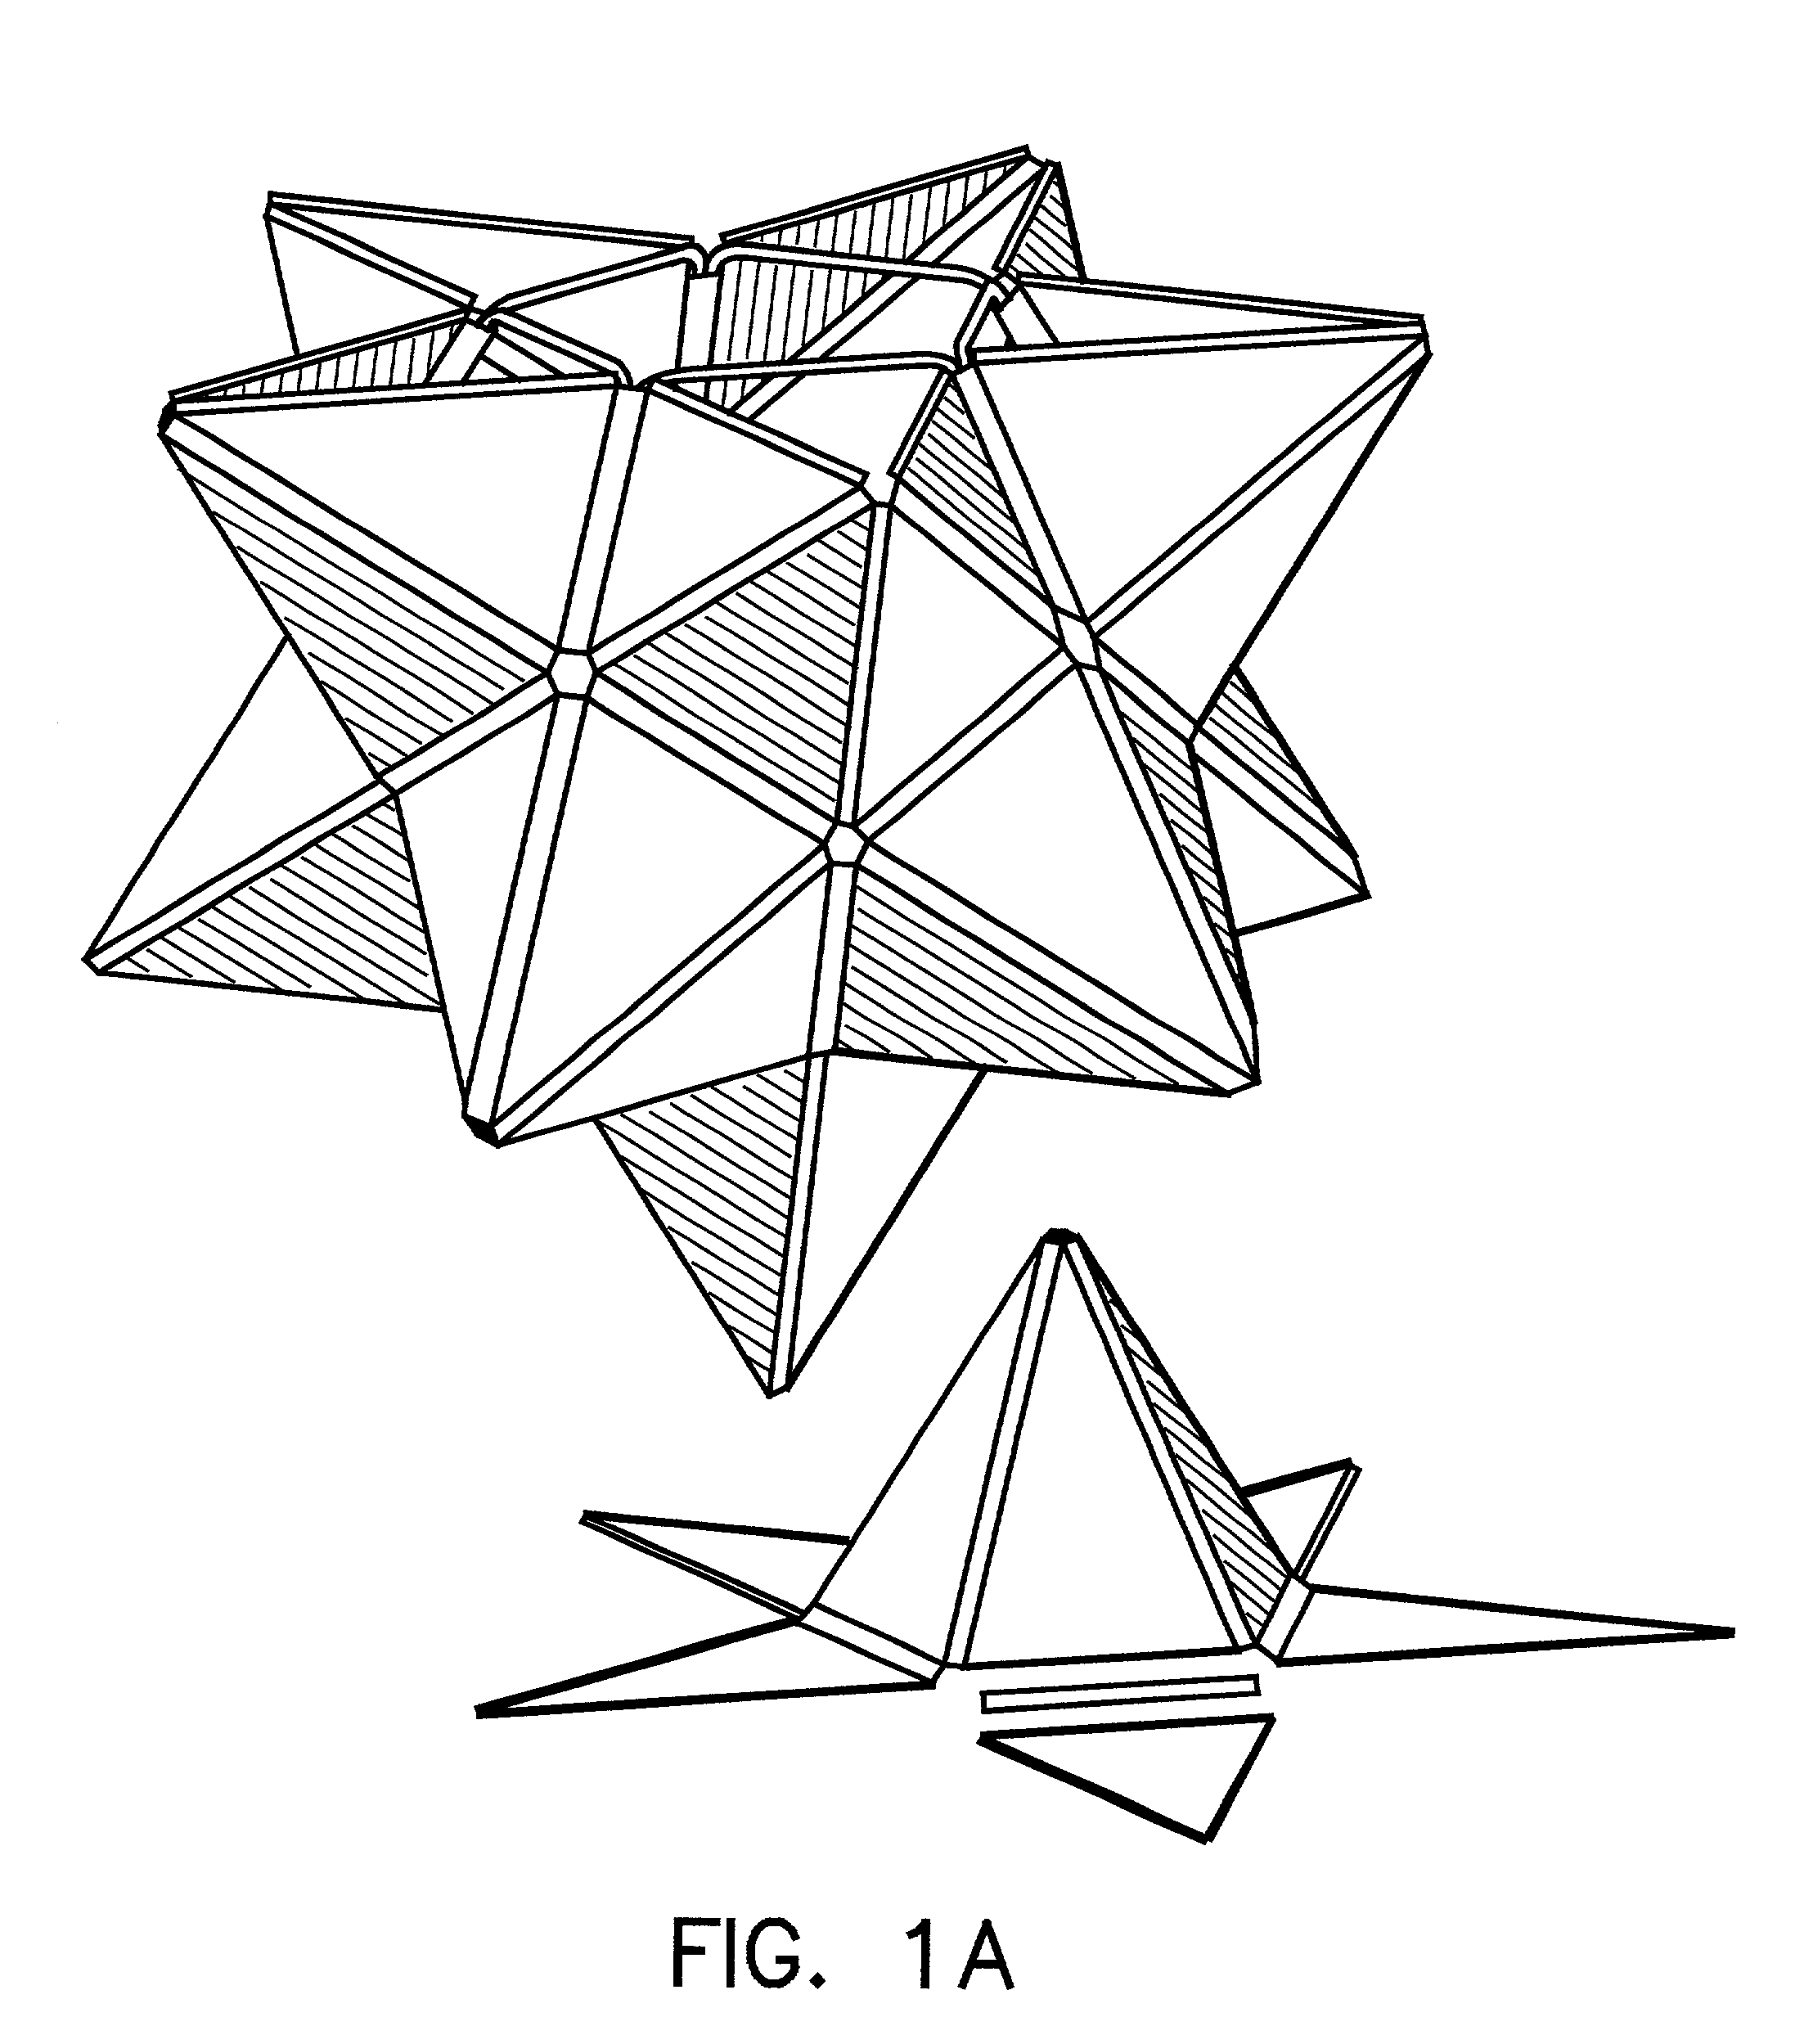 Geometric toy construction system